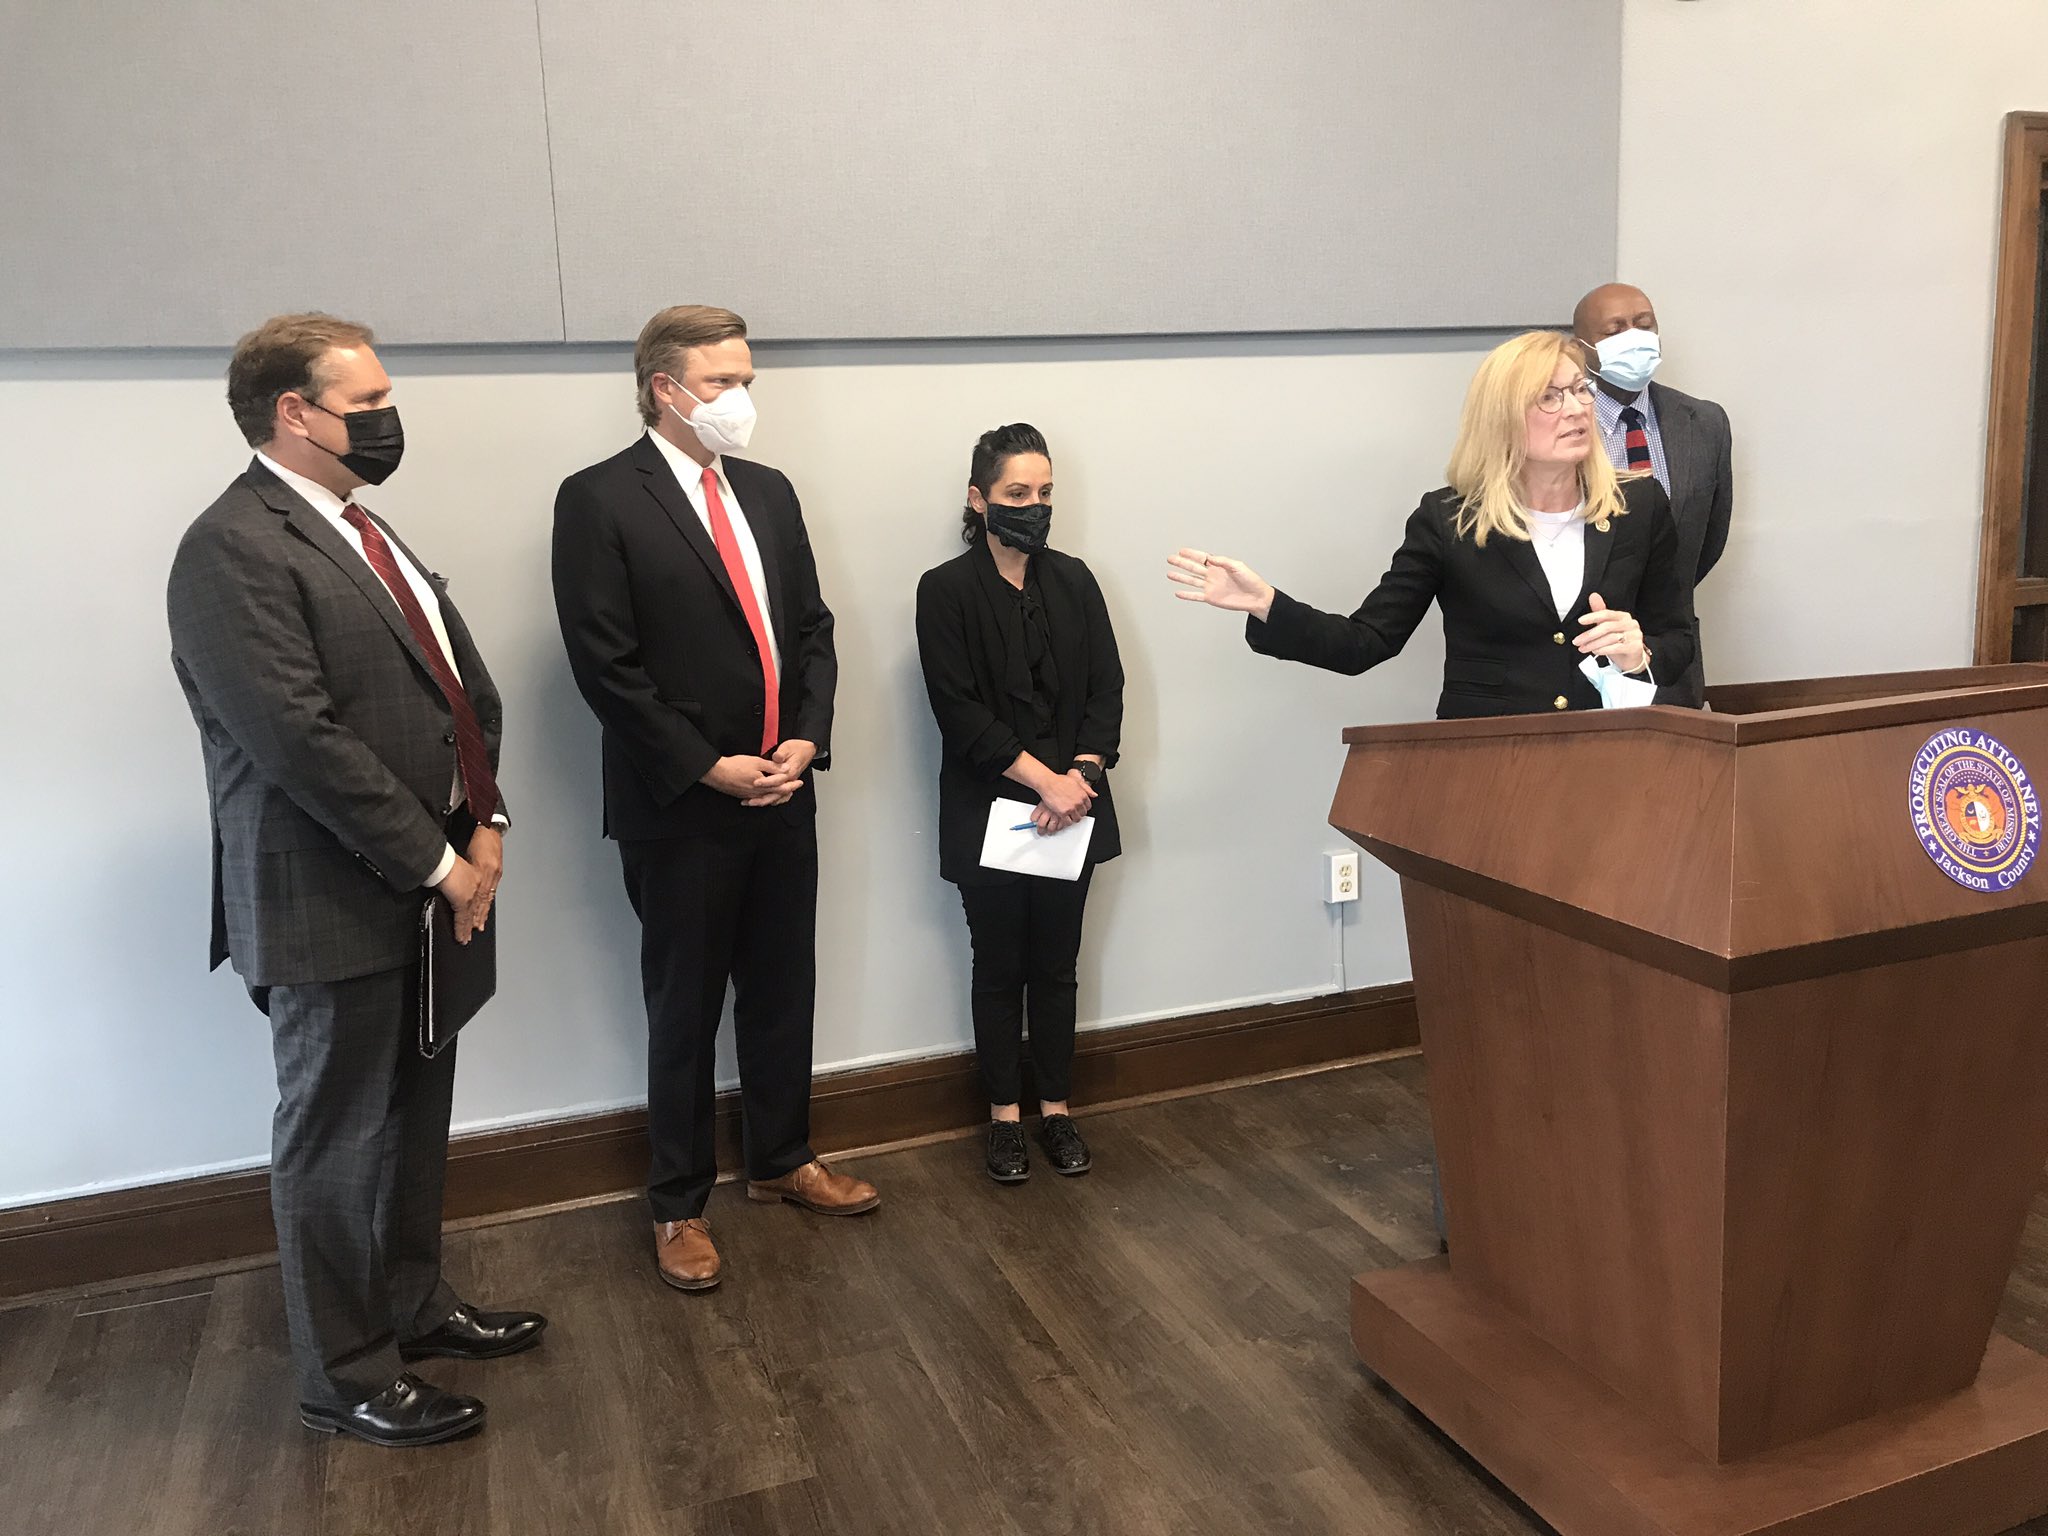 Prosecutor Jean Peters Baker at a press conference calling for the release of Kevin Strickland on May 10, 2021 in Kansas City | Source: Twitter/@angiericono